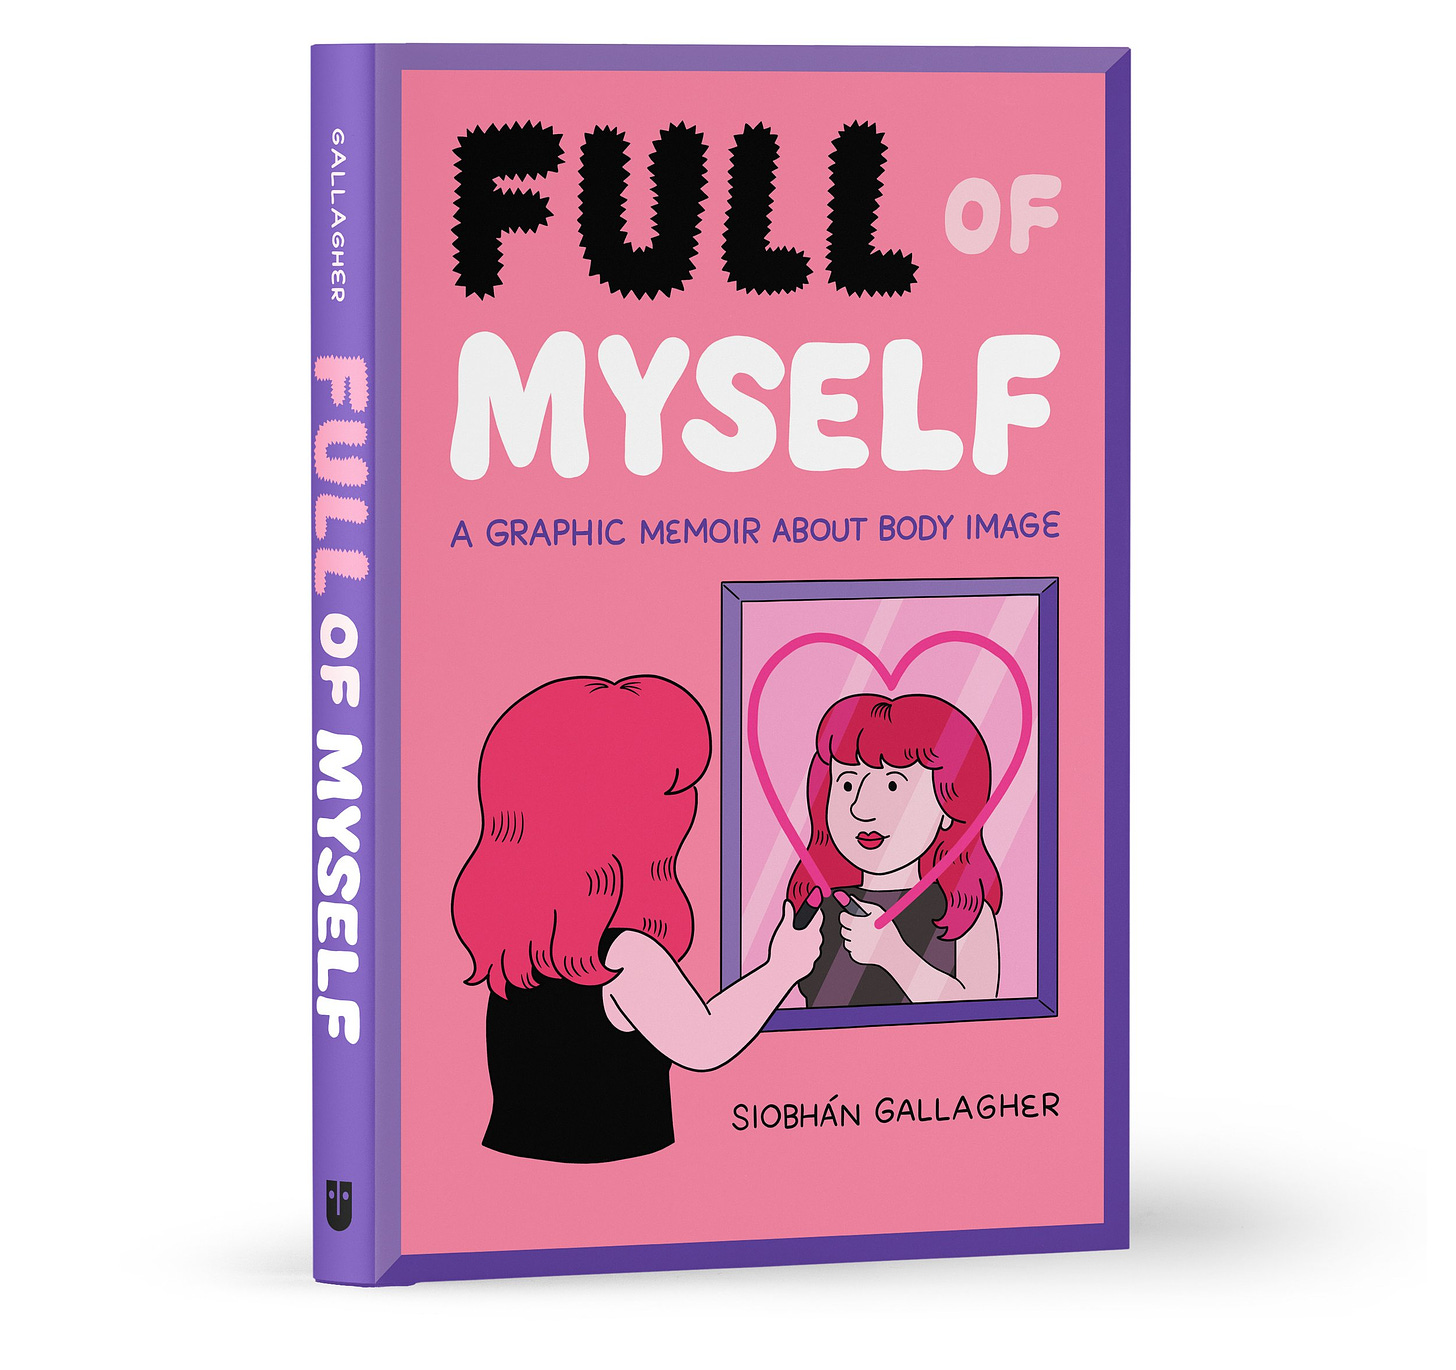 Image of book Full of Myself: A Graphic Memoir About Body Image by Siobhan Gallagher, showing a pink cover with an illustration of a woman with red hair looking at herself in the mirror and drawing a heart around herself.